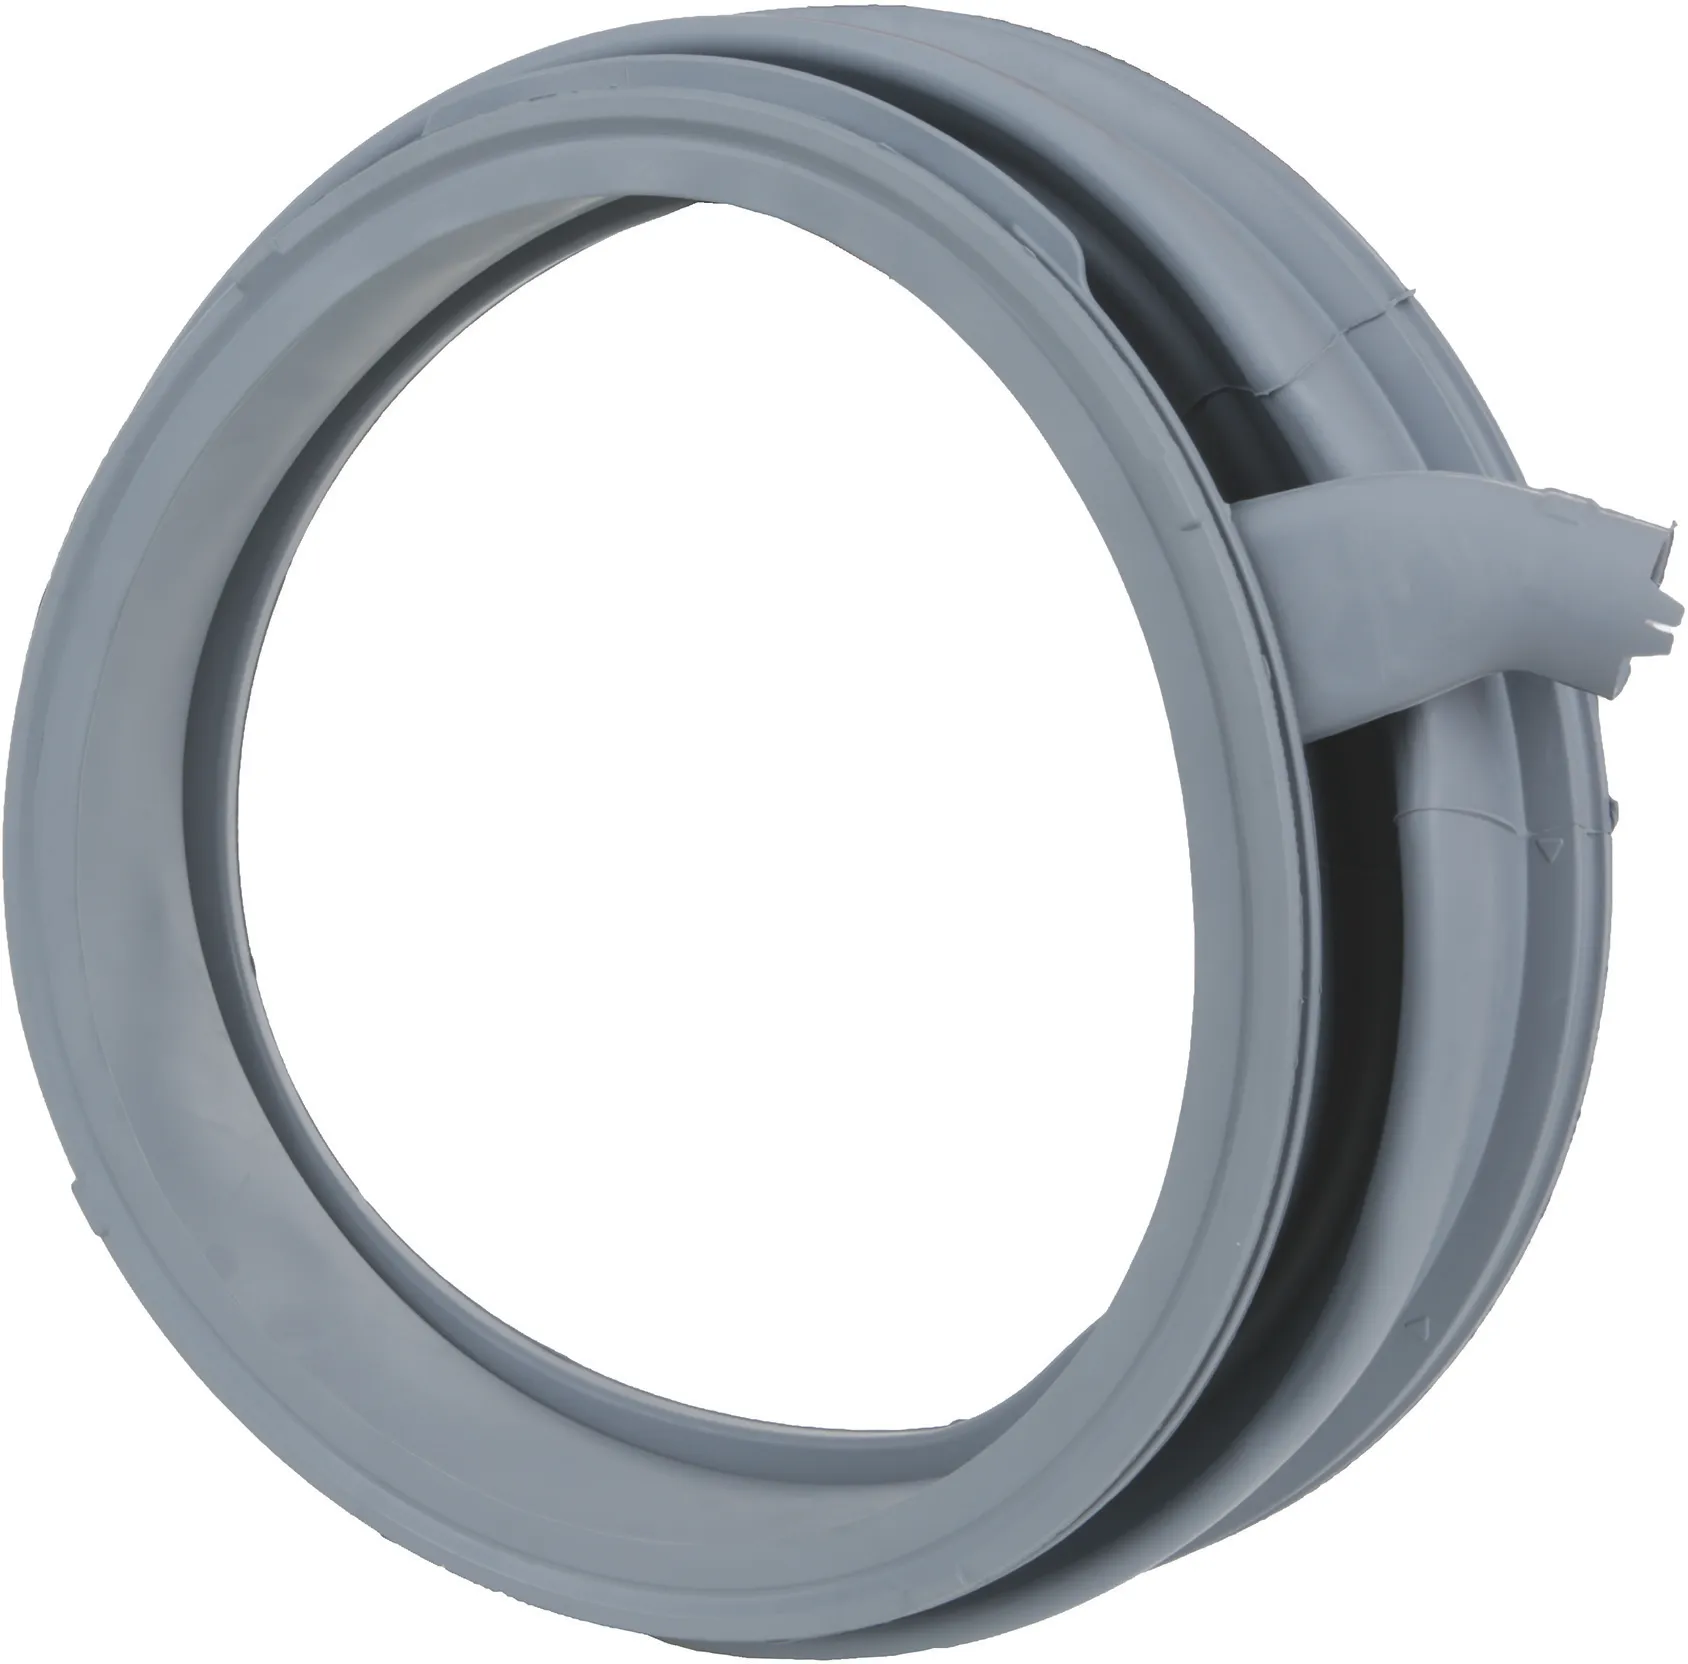 Boot gasket suds resistant, without ligthing nozzle silver grey (EPDM) grease-resistant - 772653 